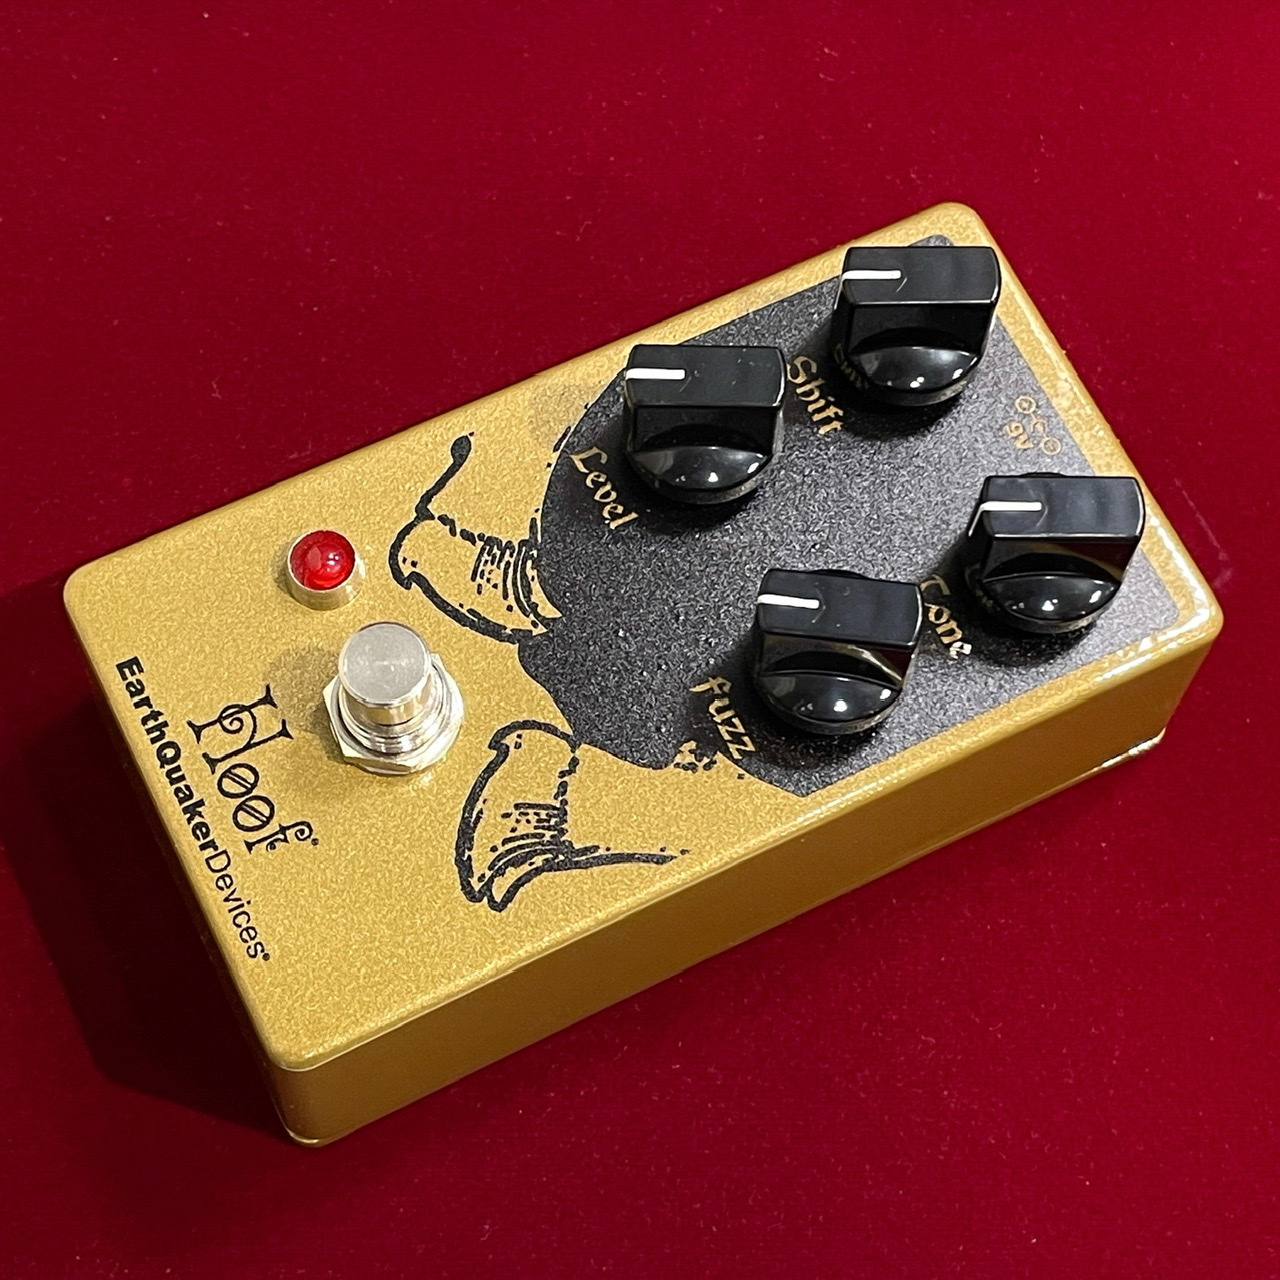 EarthQuaker Devices Hoof Germanium/Silicon Fuzz